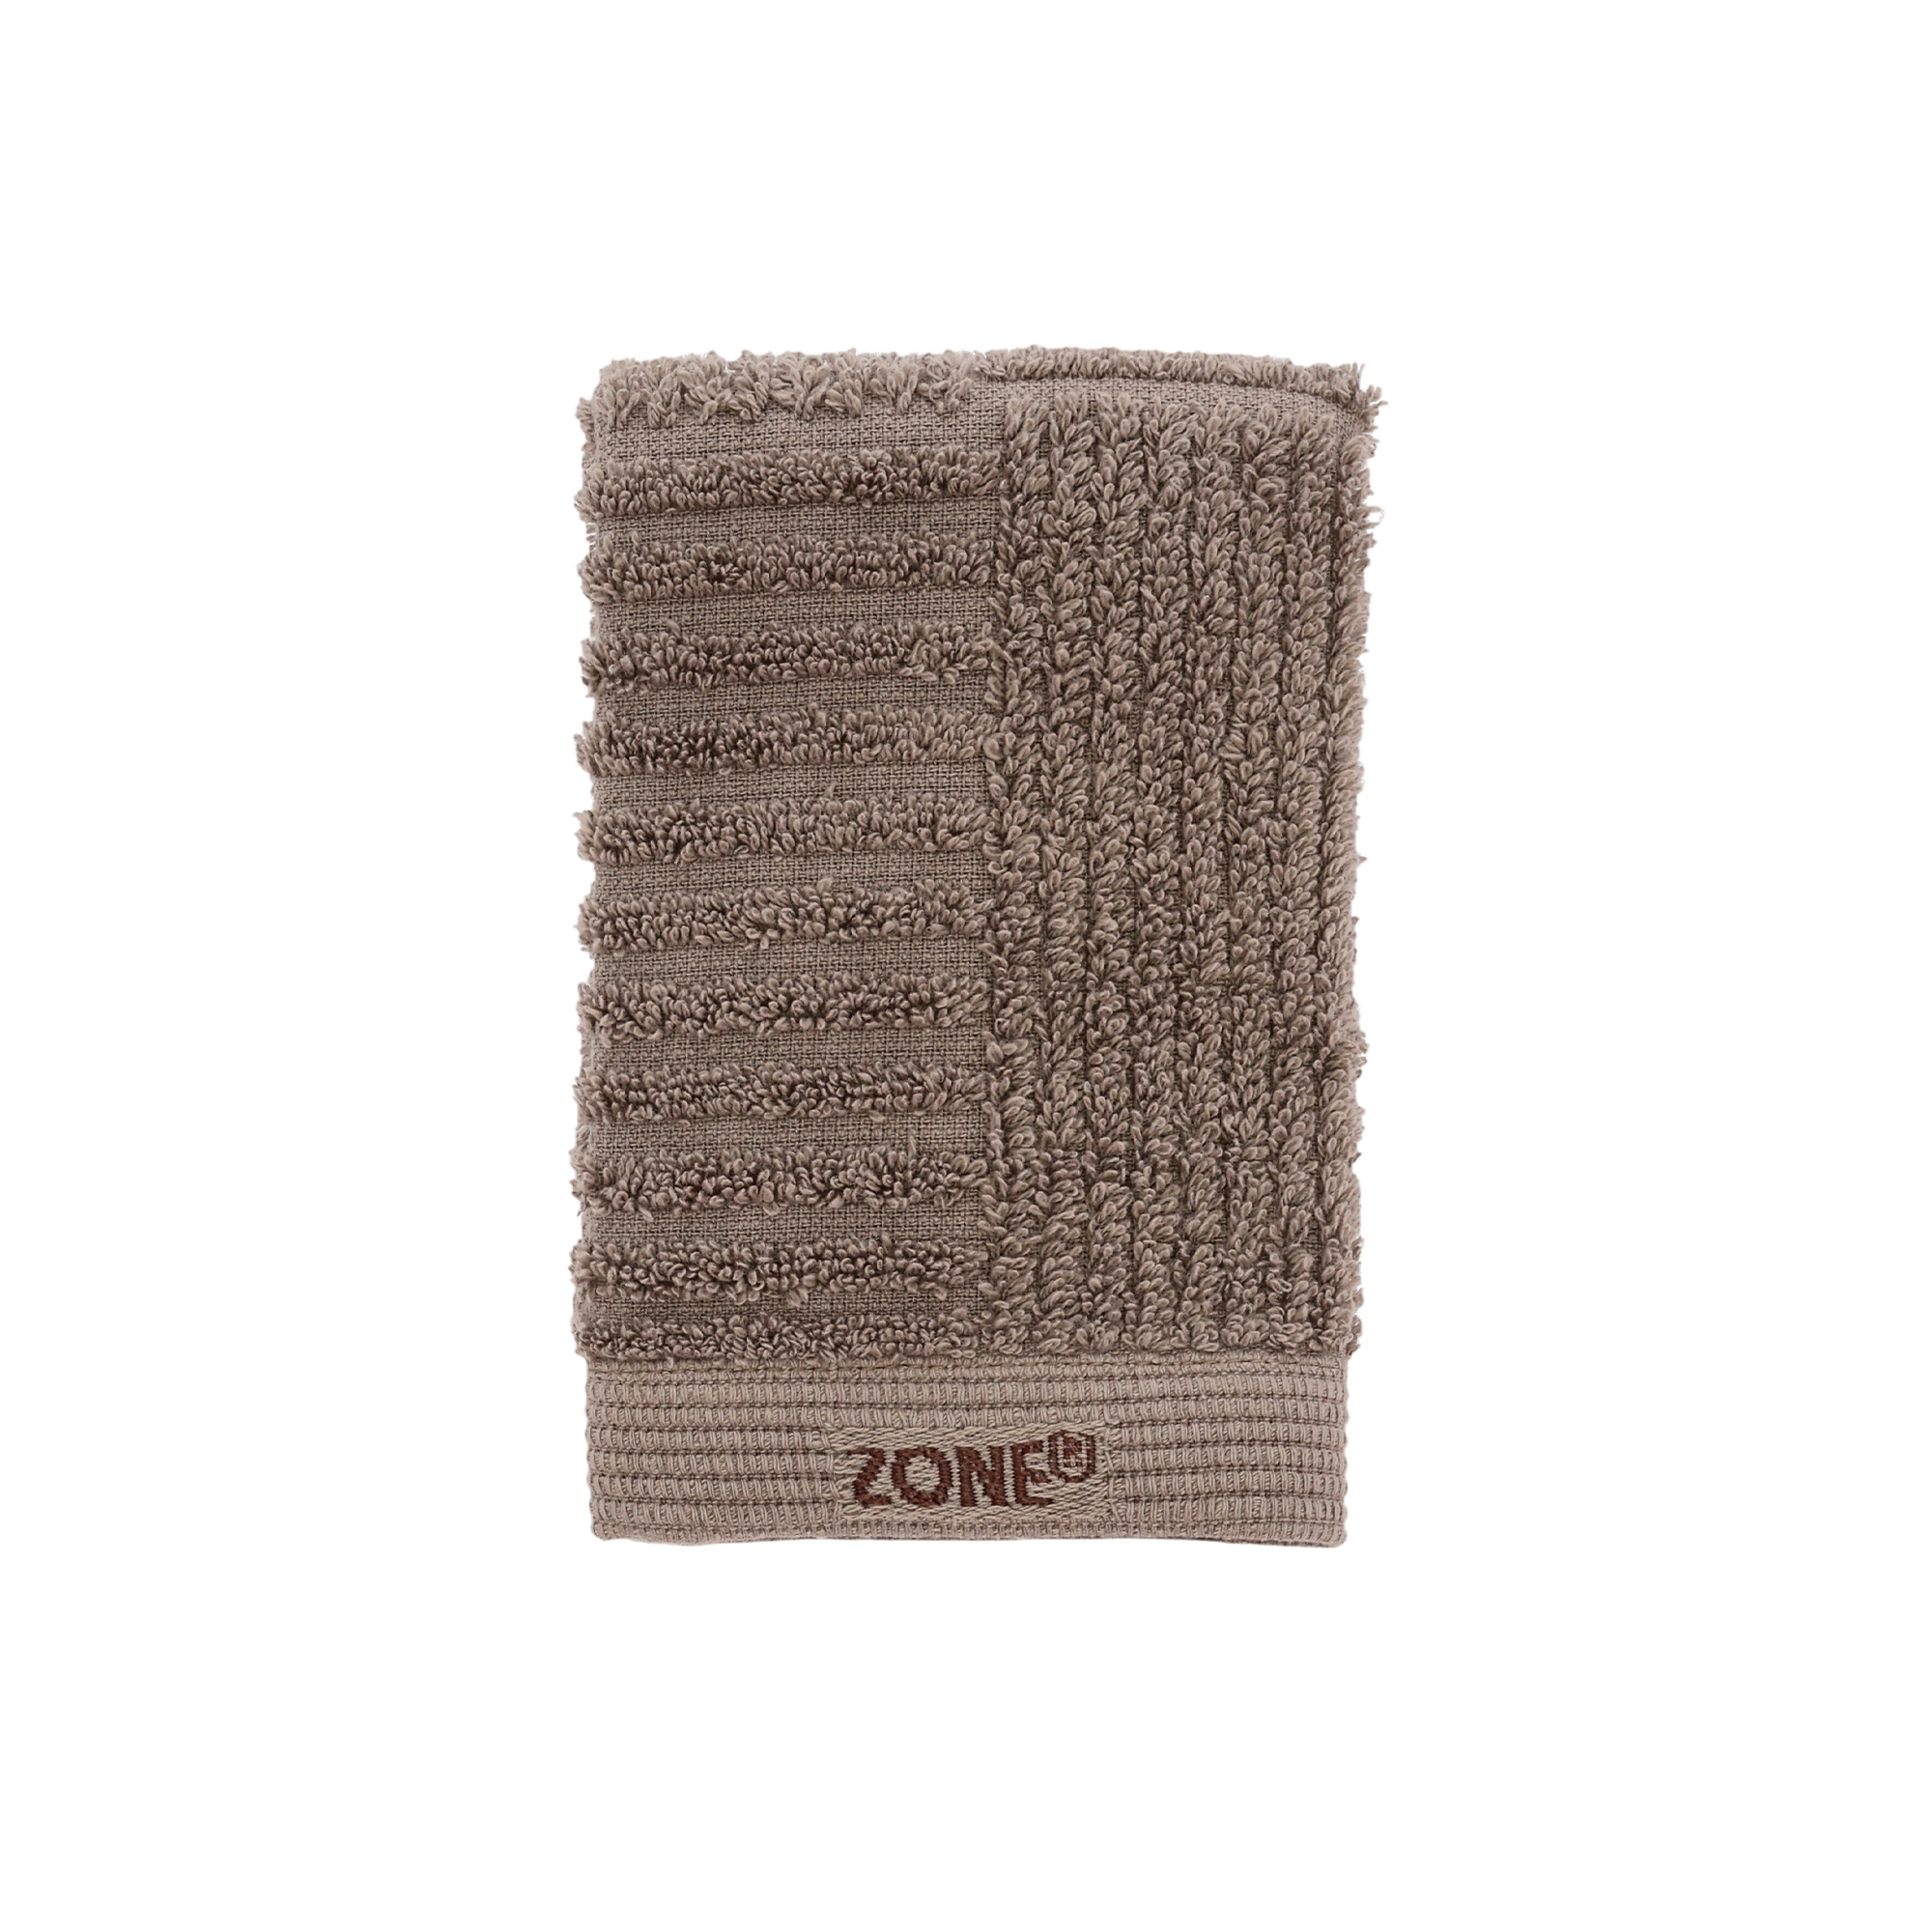 Zone - Classic Flannel - 30 x 30 cm - Taupe